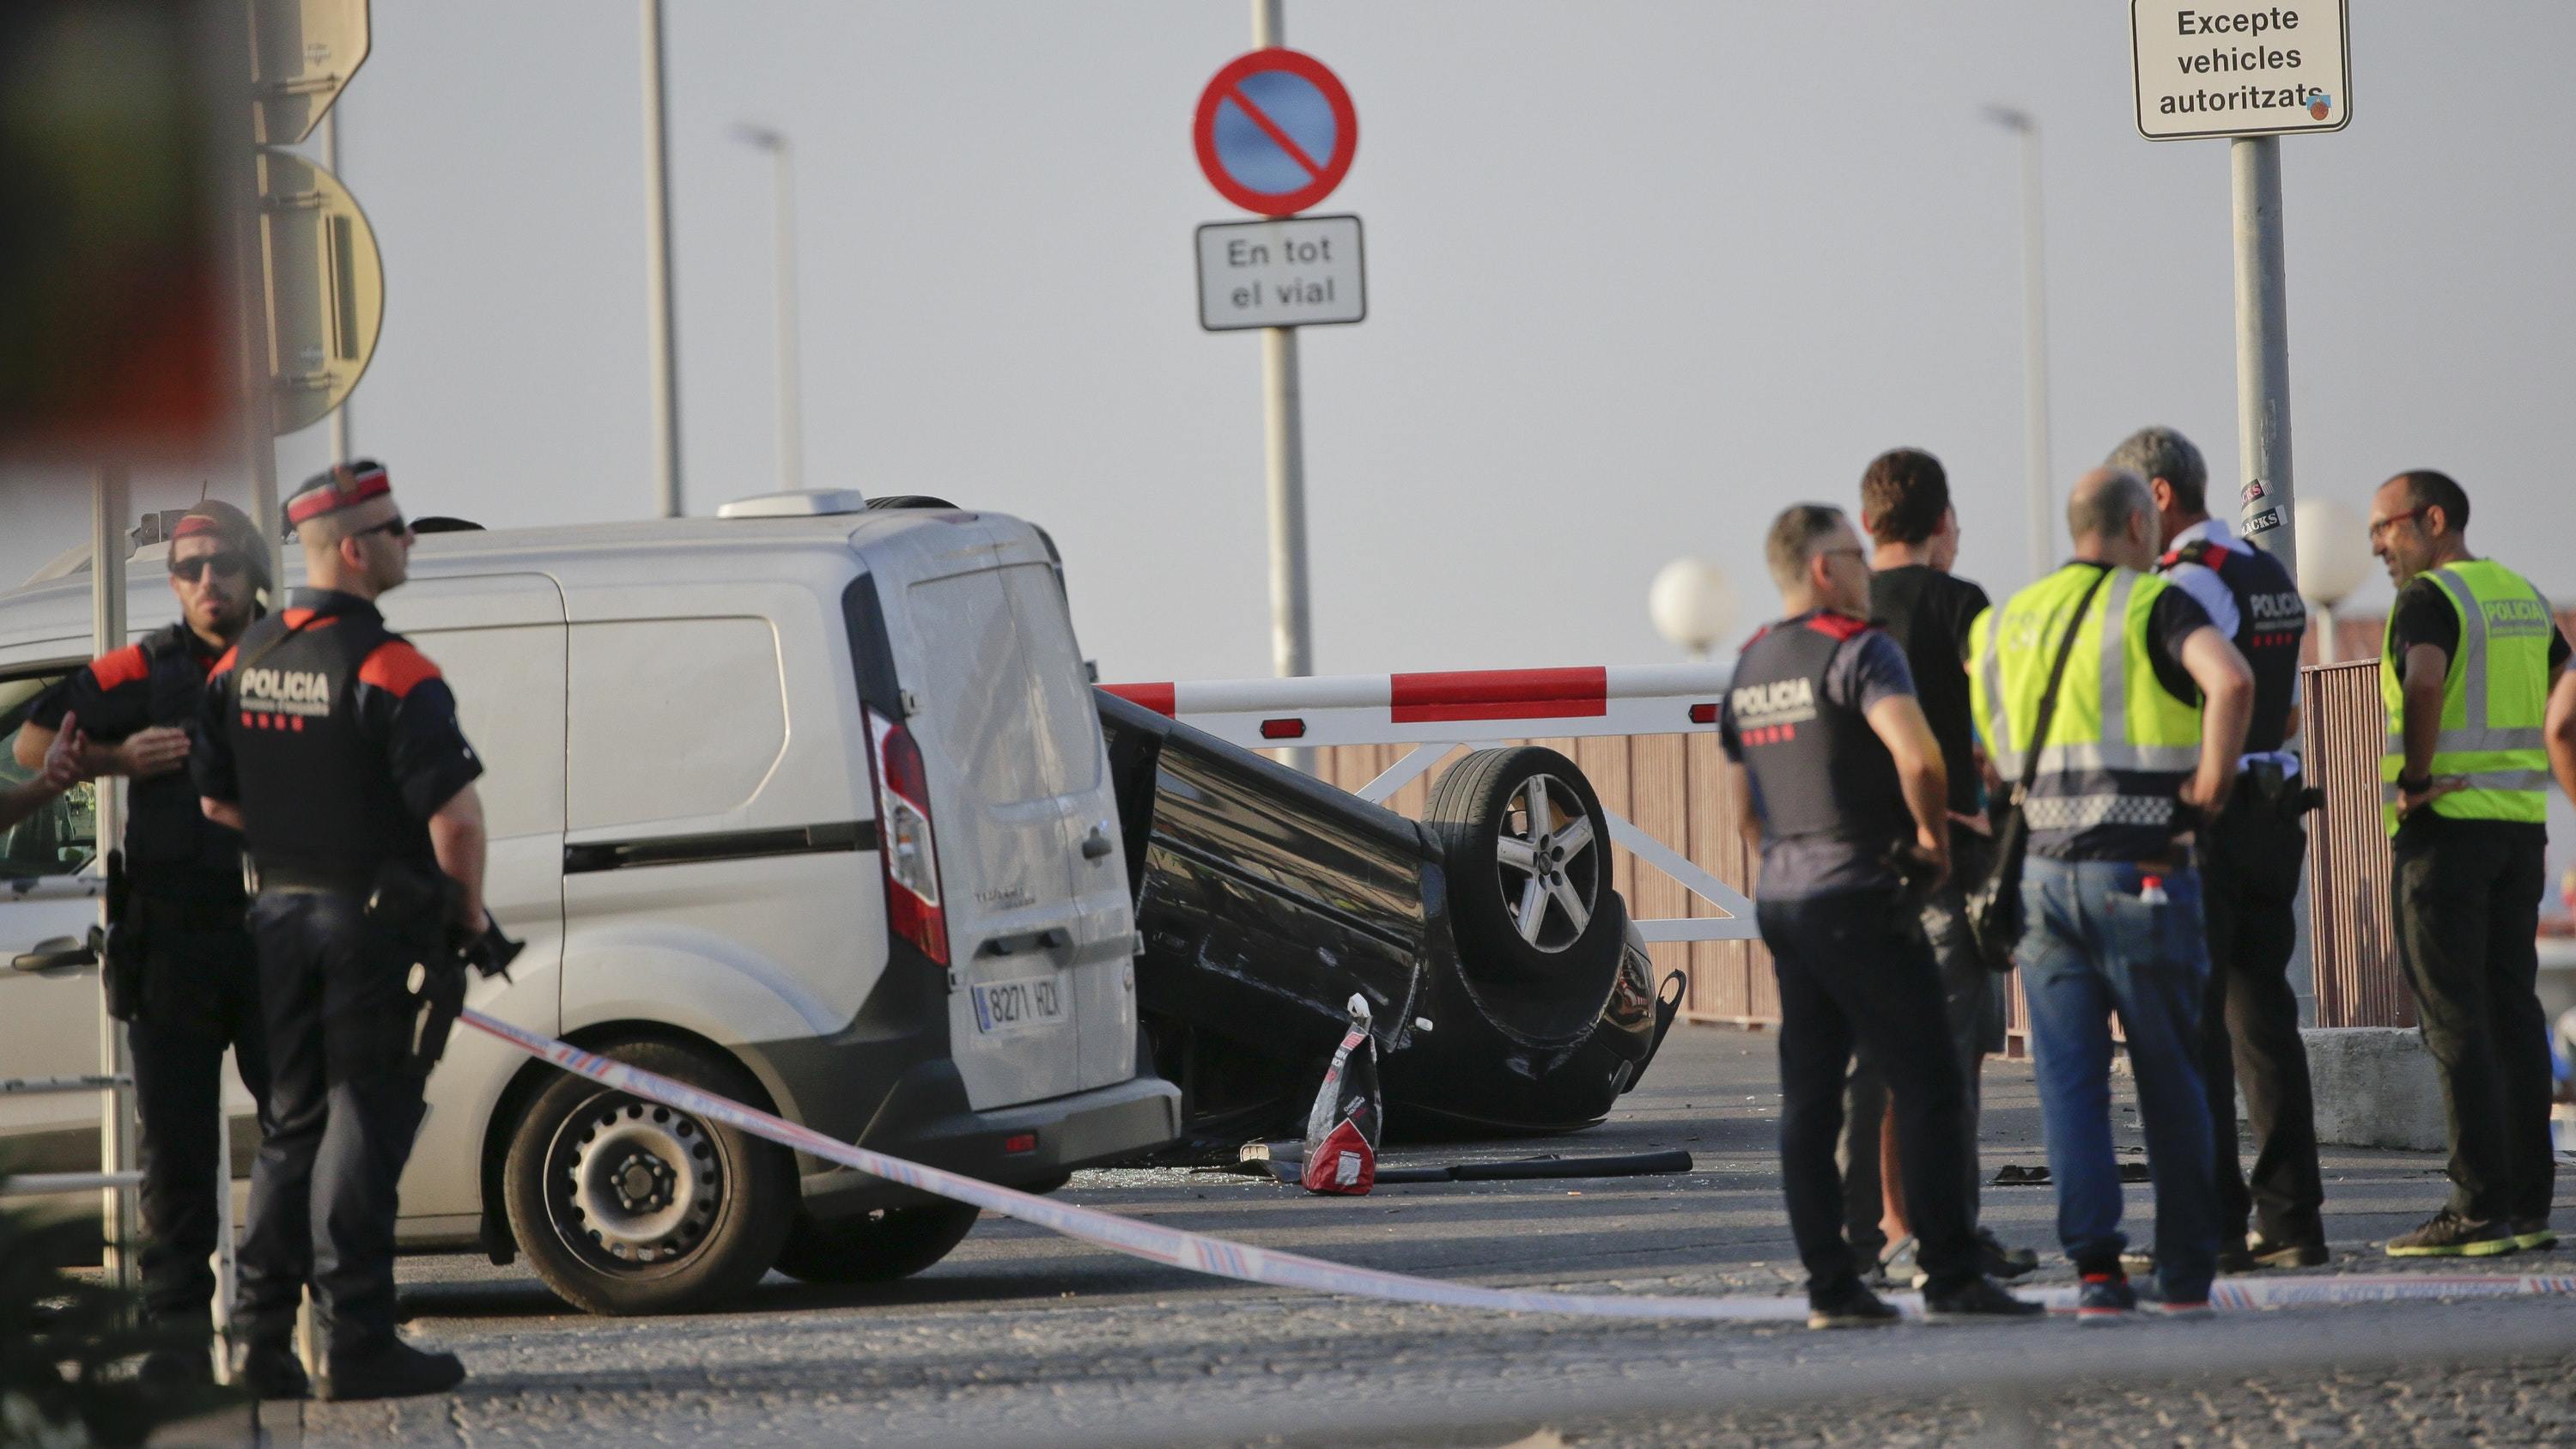 An overturned car at the spot where terrorists were intercepted by police in Cambrils, Spain (Emilio Morenatti/AP)